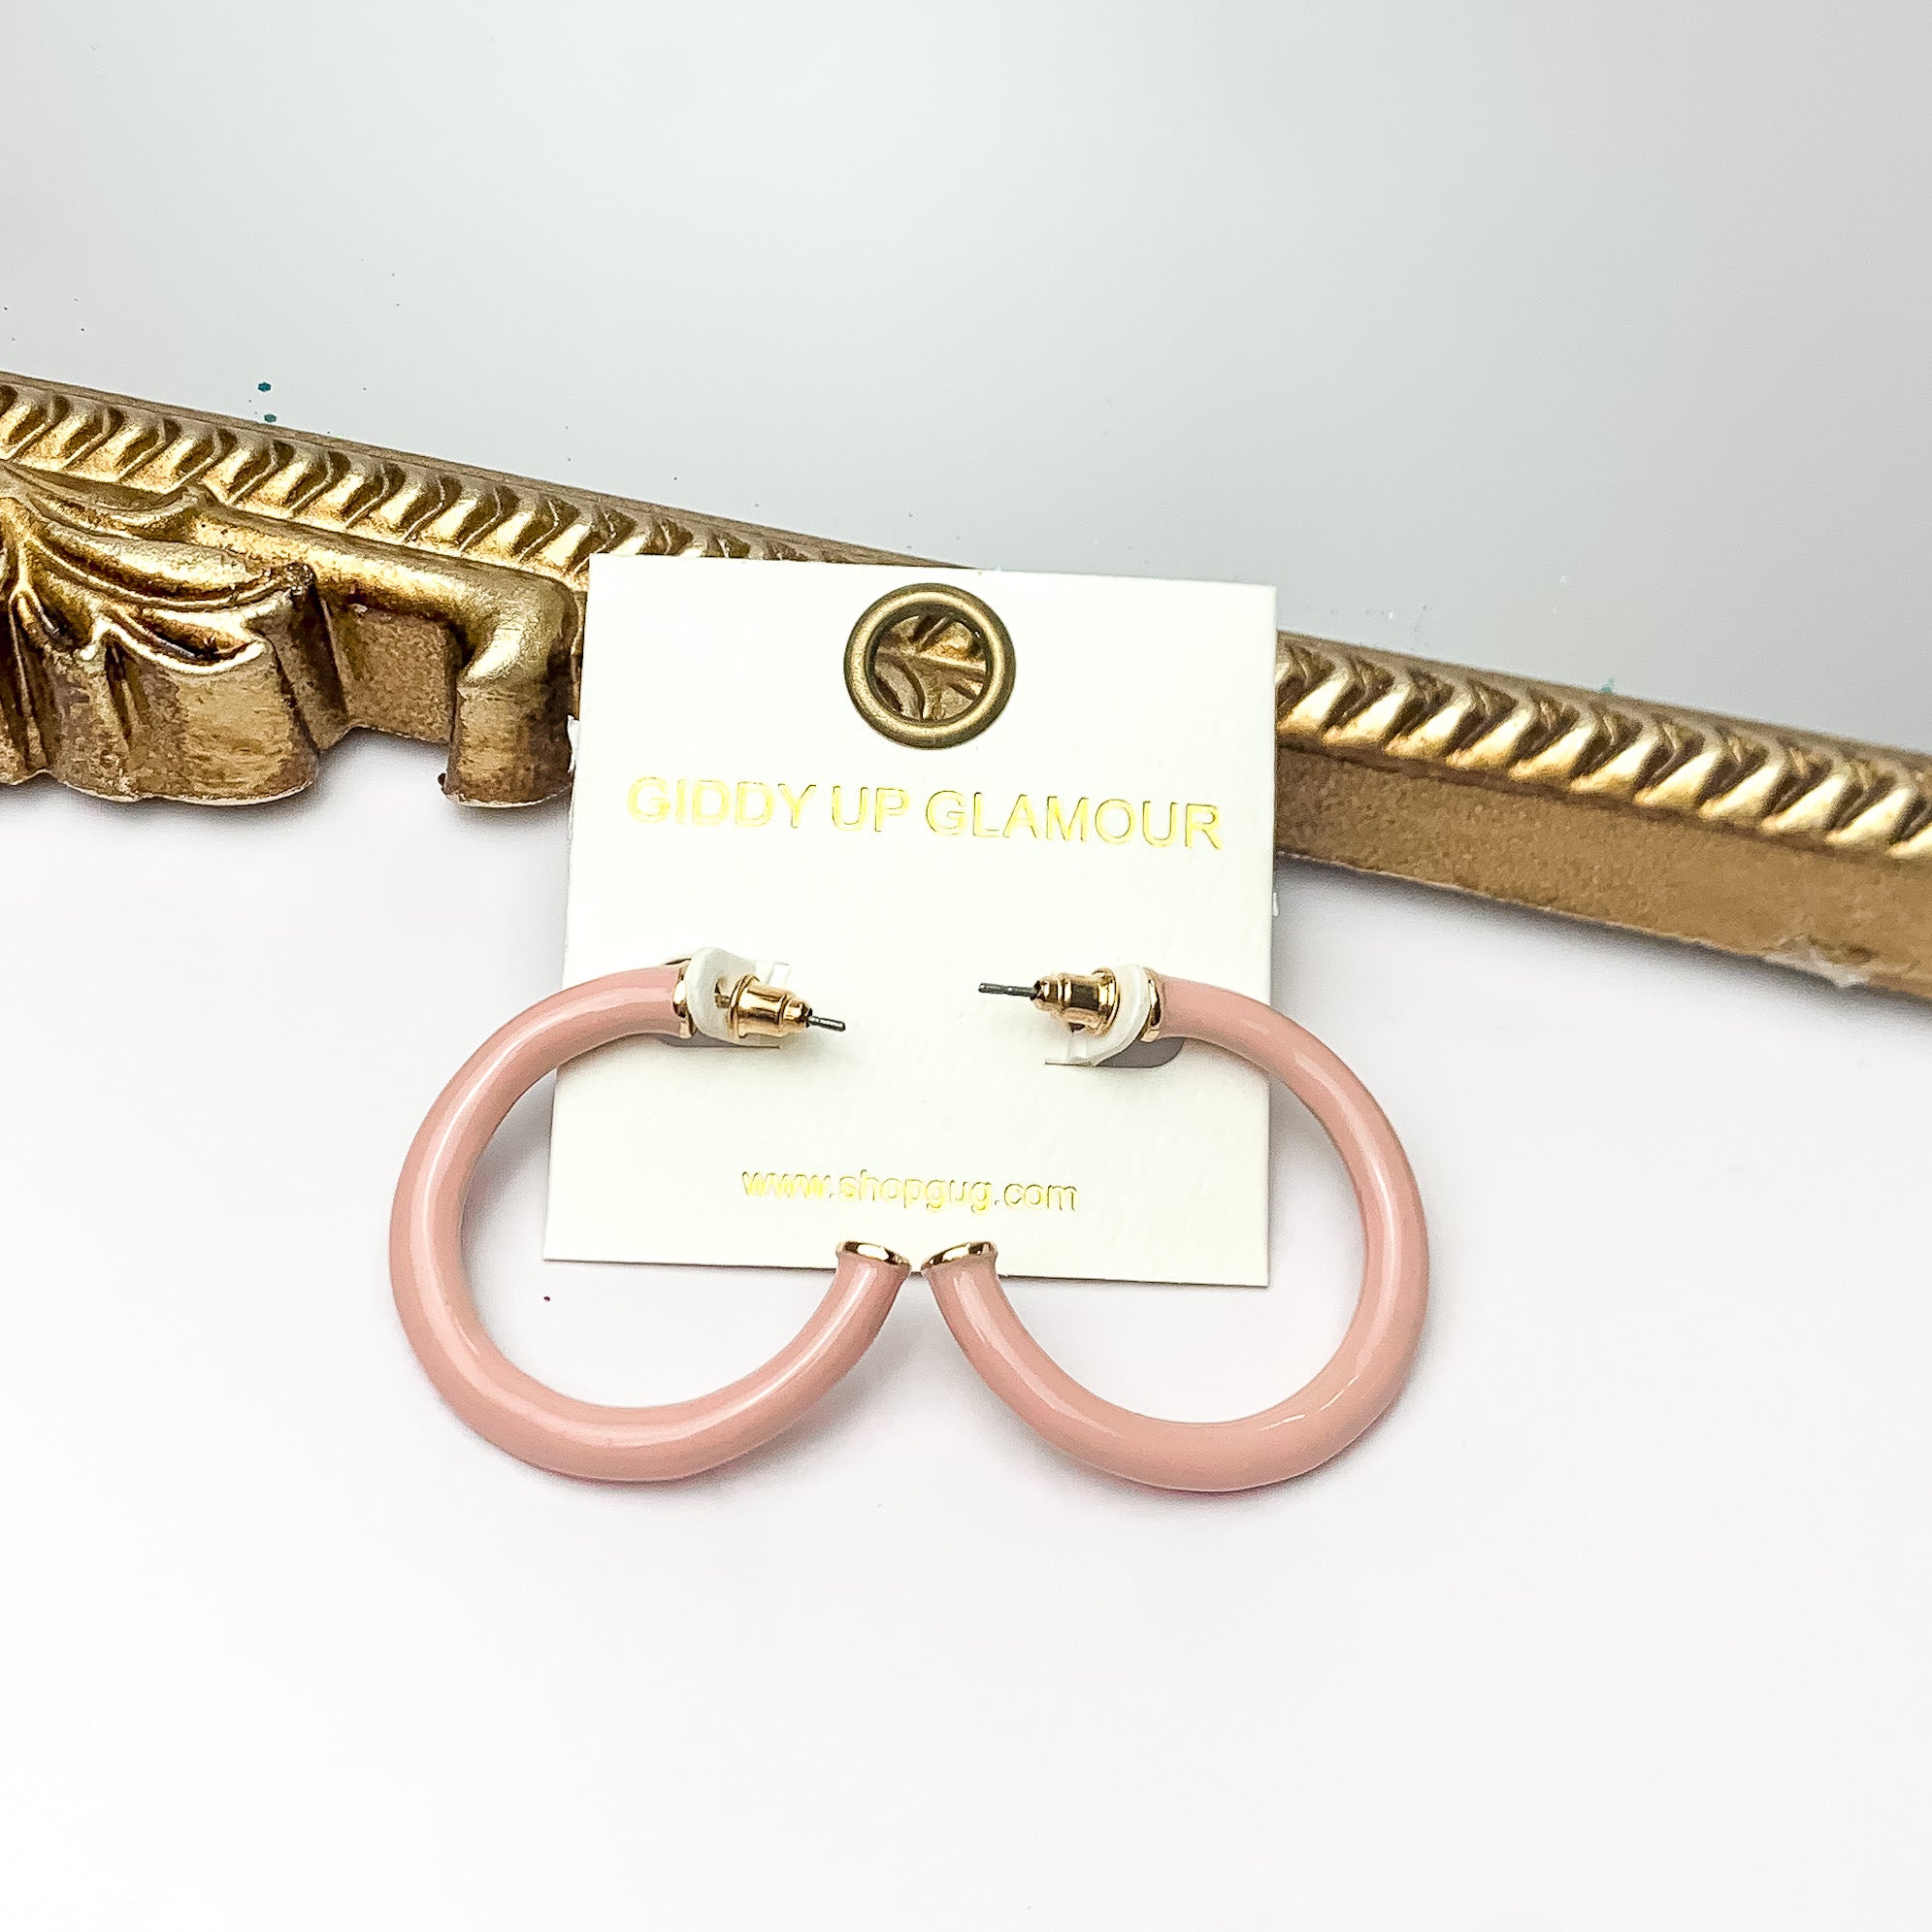 Plan For Cabo Small Hoop Earrings in Pale Pink. Pictured on a white background with a gold frame behind the earrings.